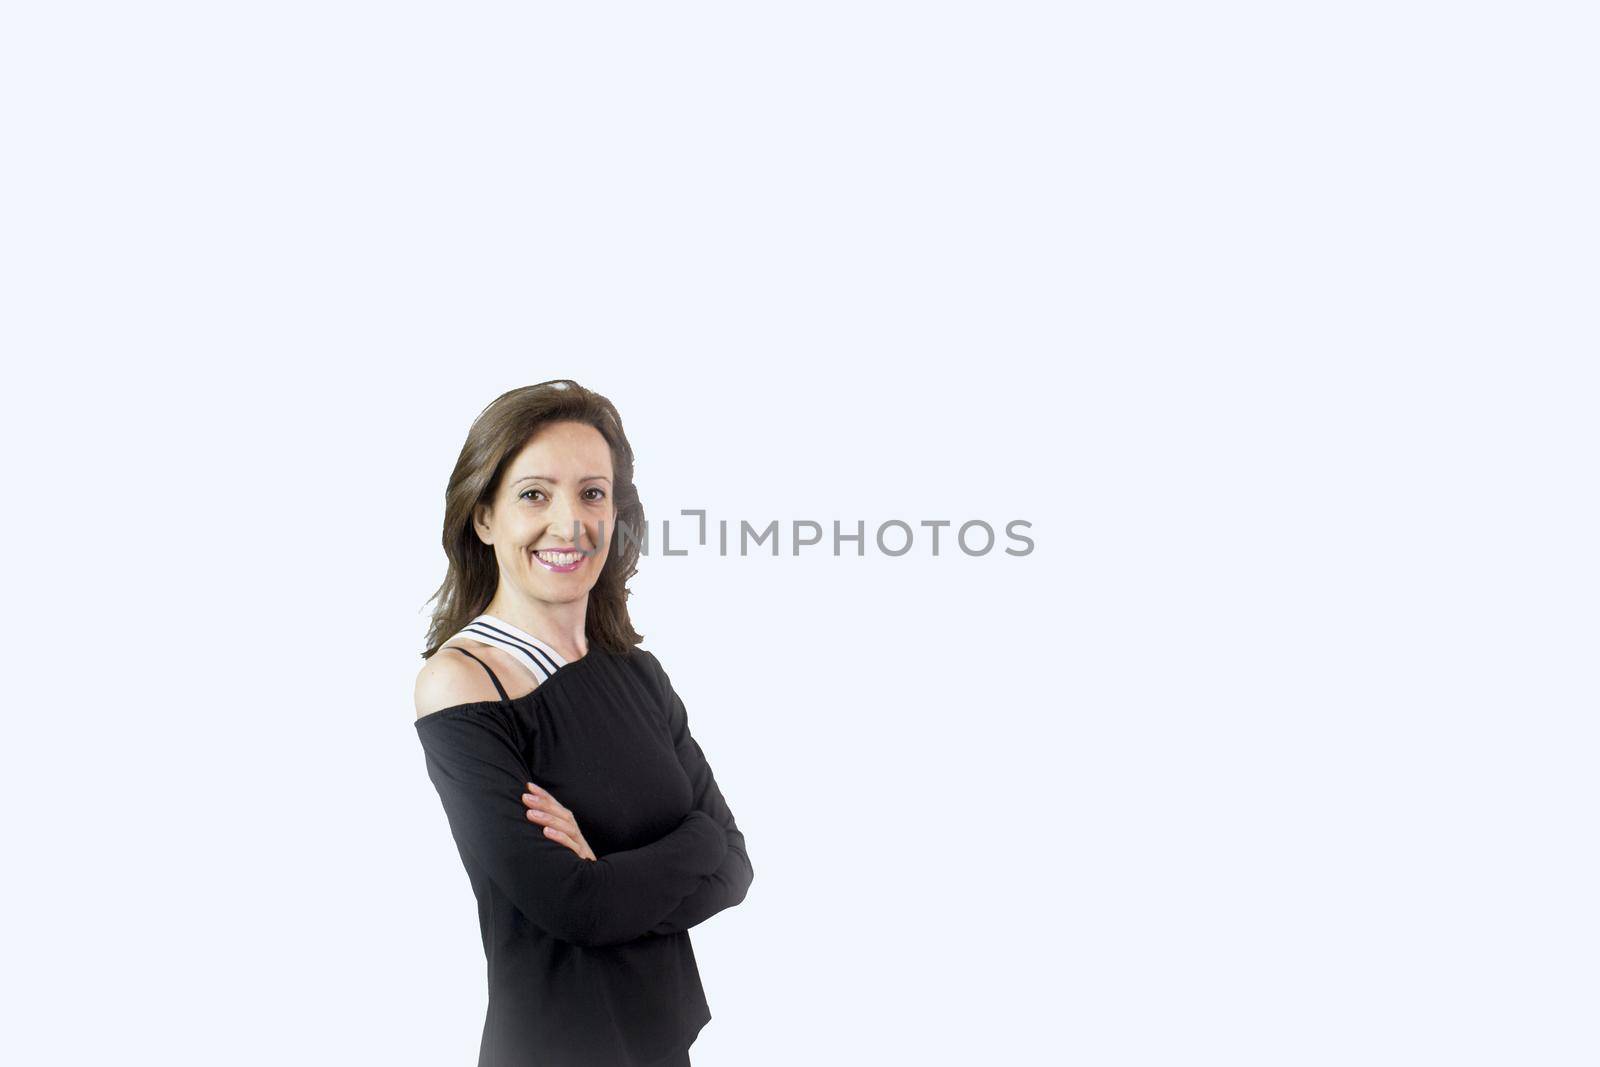 Forty year old woman with happy, joyful and positive expression. Black tshirt and light background